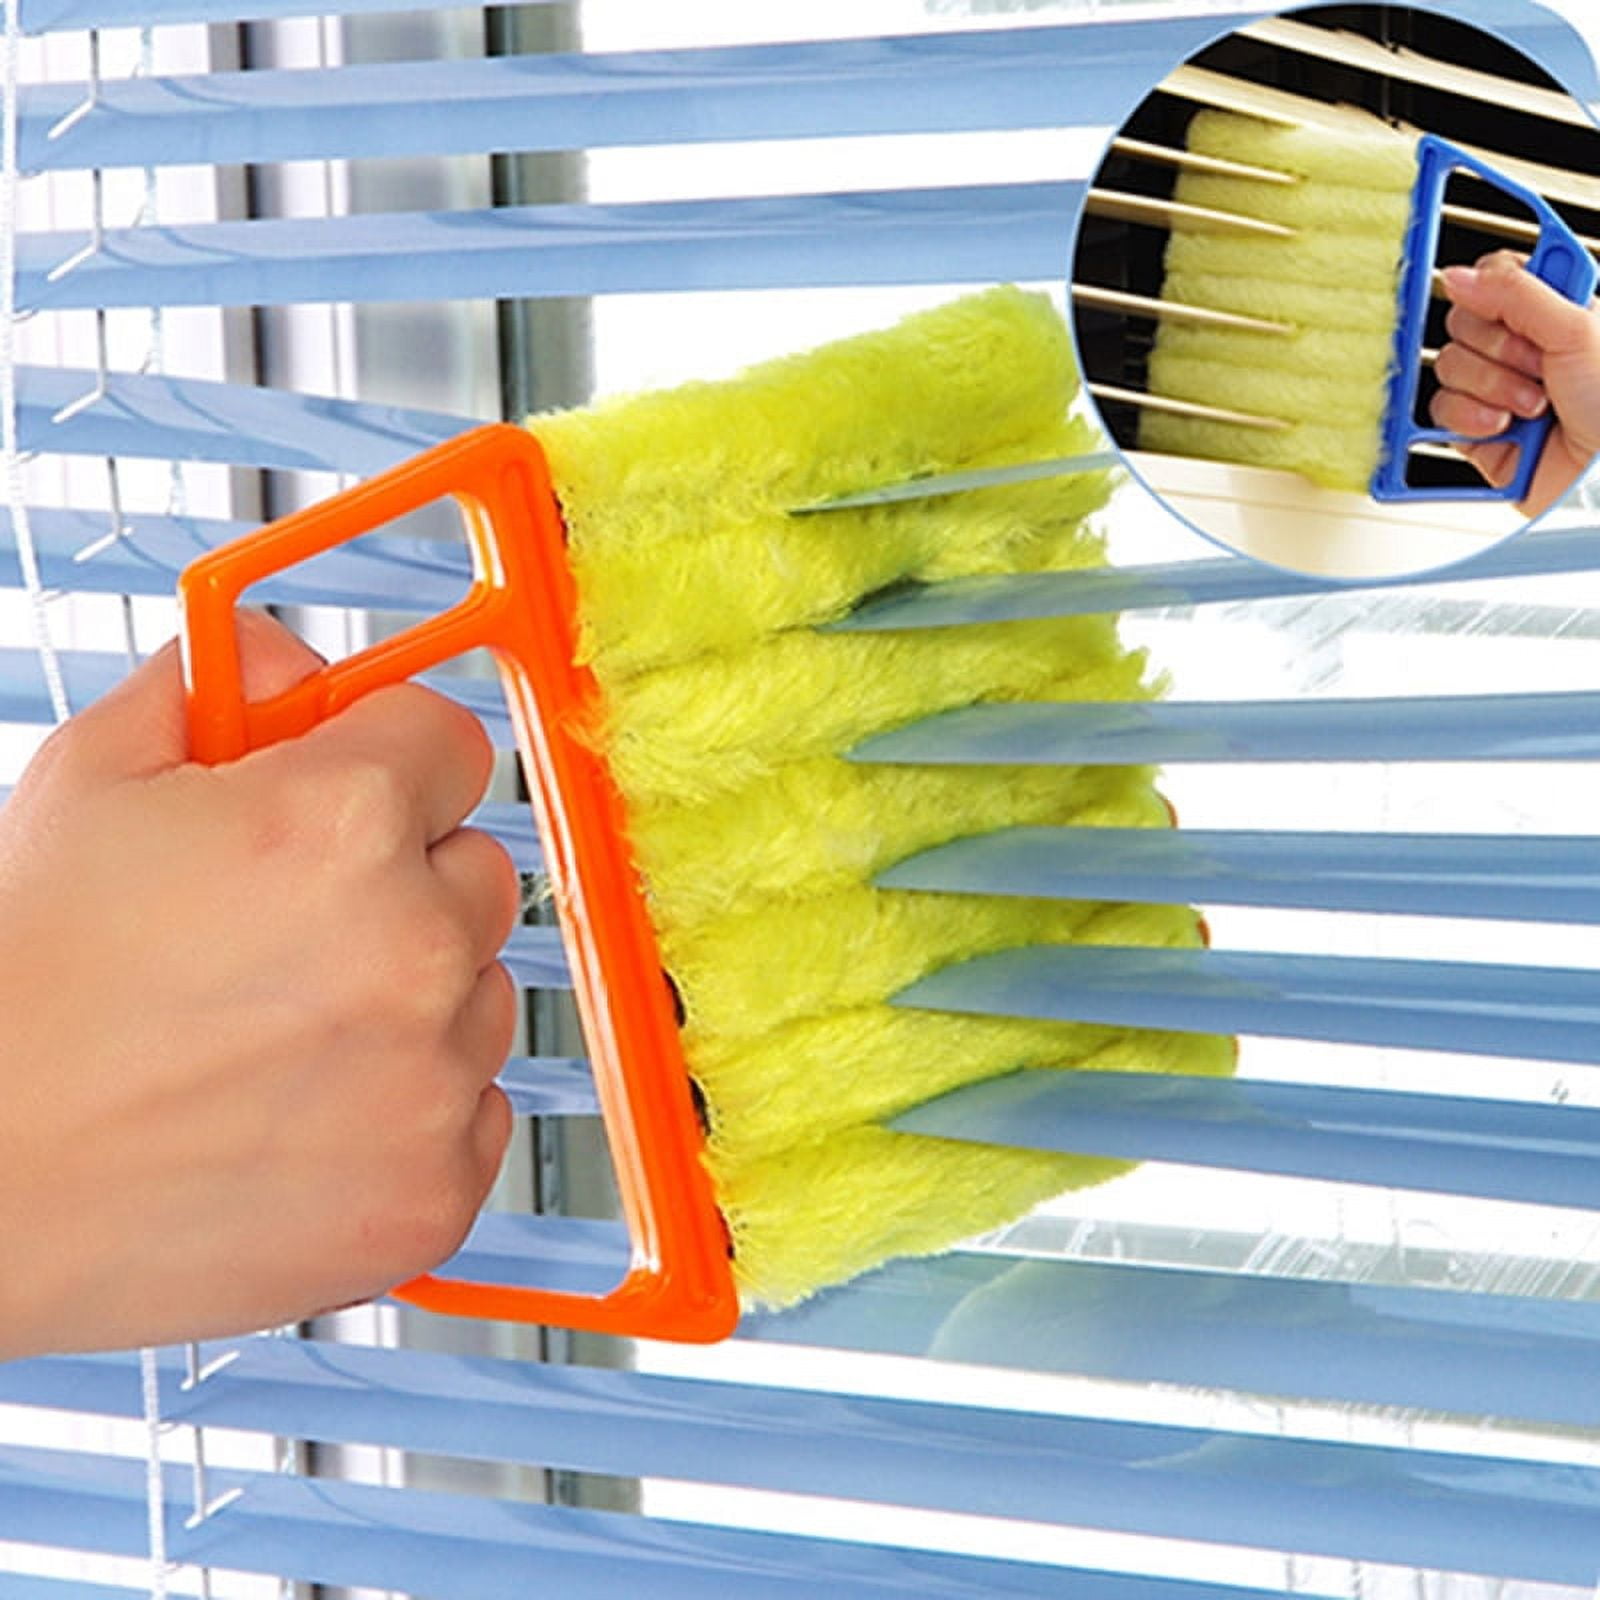 Openfly Venetian Blind Cleaner Duster Tool, Hand-held Window Shutters  Duster, Window Blind Cleaning Tool, Groove Gap Cleaning Brush for Blind,  Air